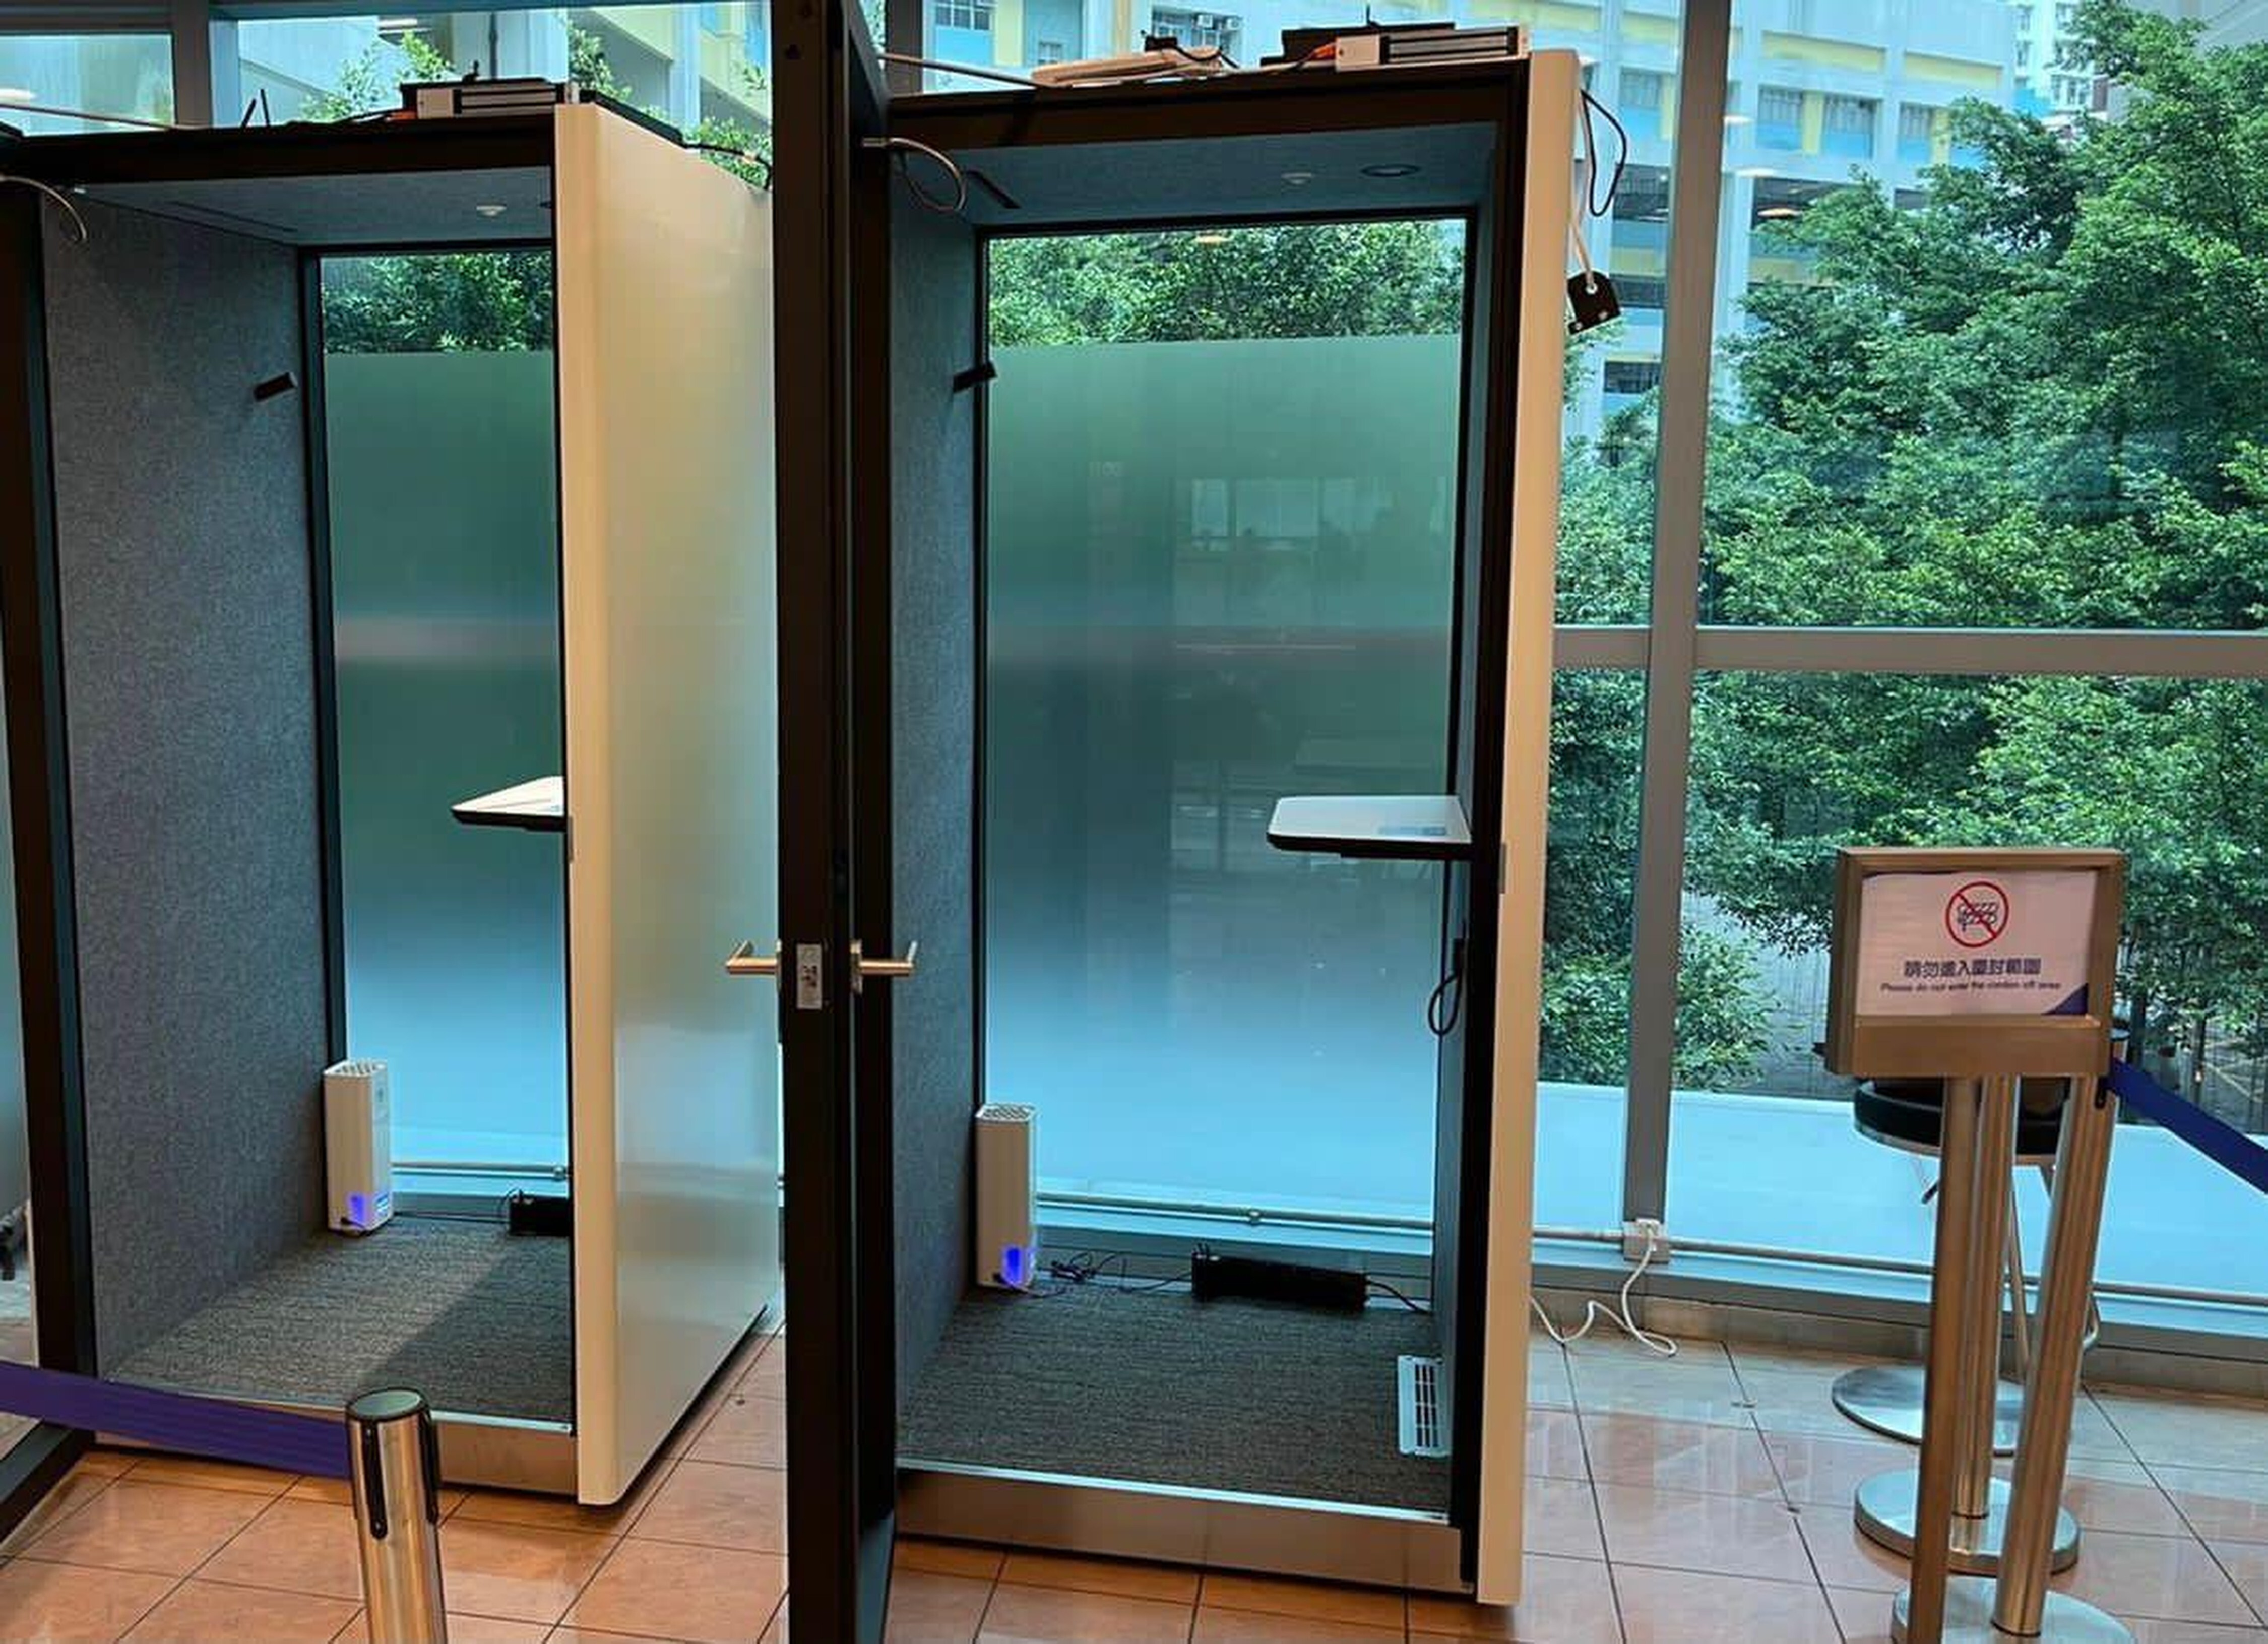 The first set of booths have been launched in seven shopping centres across Hong Kong. Photo: Handout